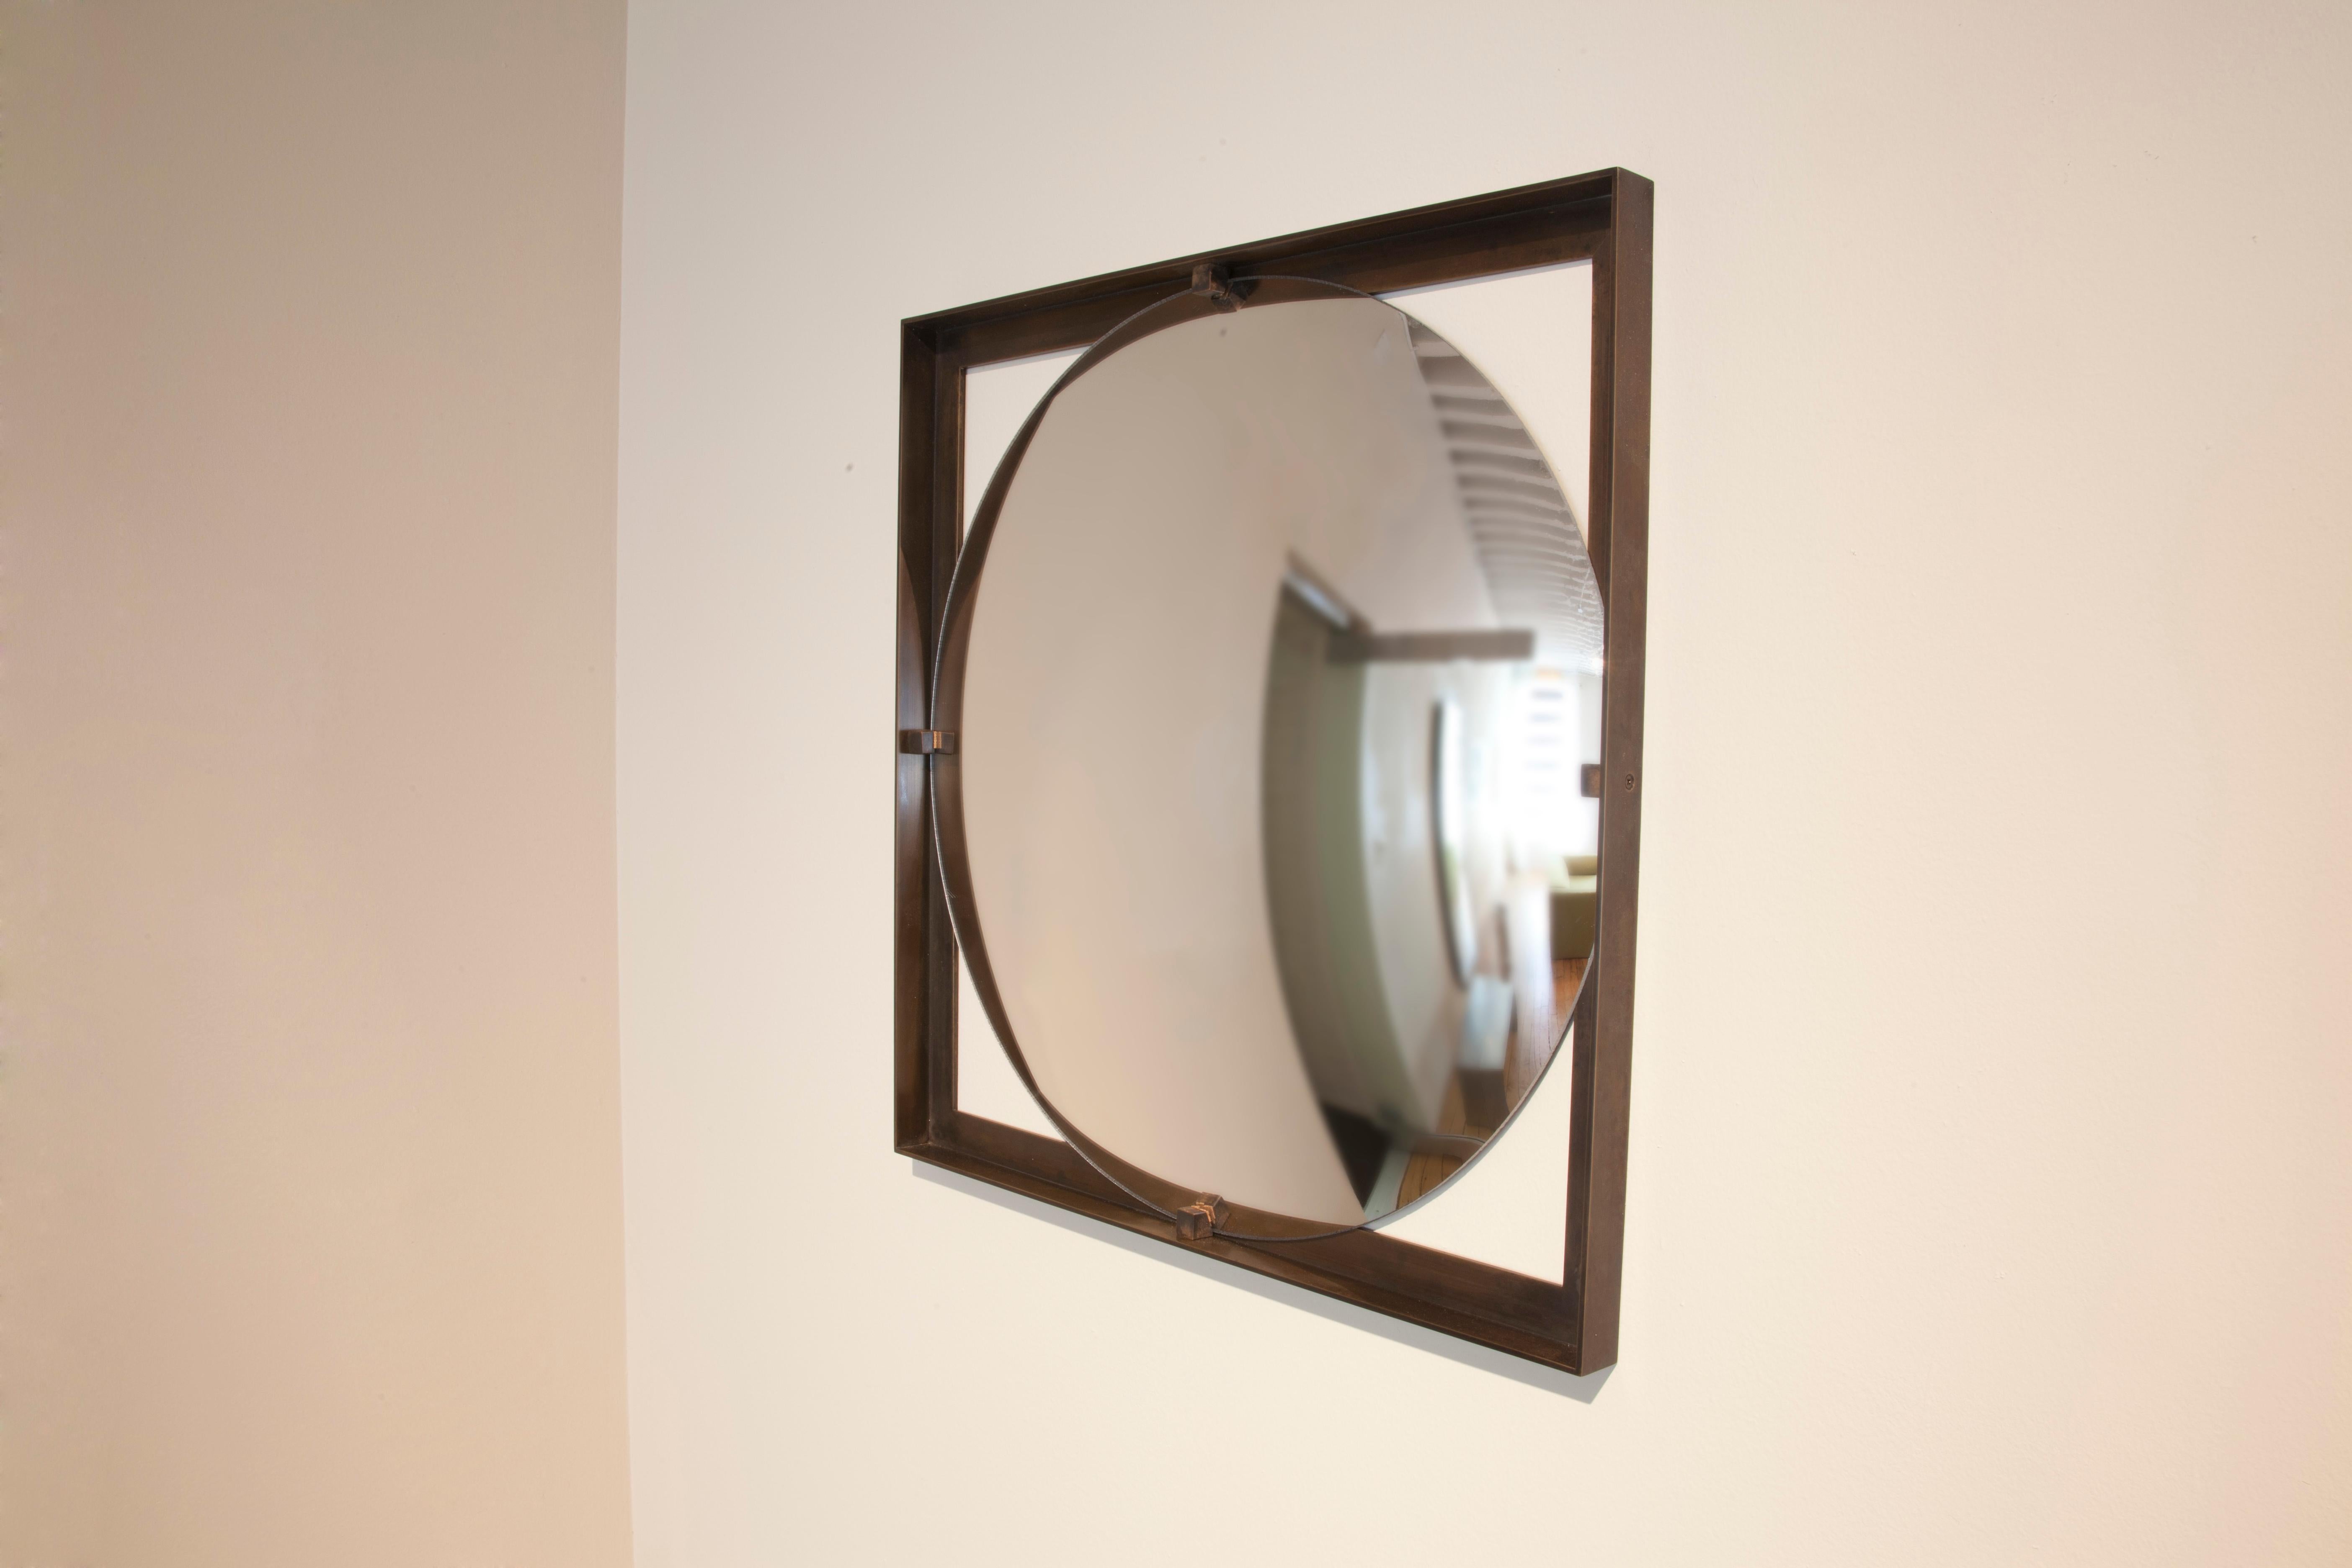 Galt convex mirror by Gentner Design
Dimensions: D 45.7 x H 2.5 cm
Materials: bronze, mirror
Available in 2 sizes: D45.7cm, D91.4cm.

Gentner Design
Rooted in a language of sculpture, character defining details, and world renowned